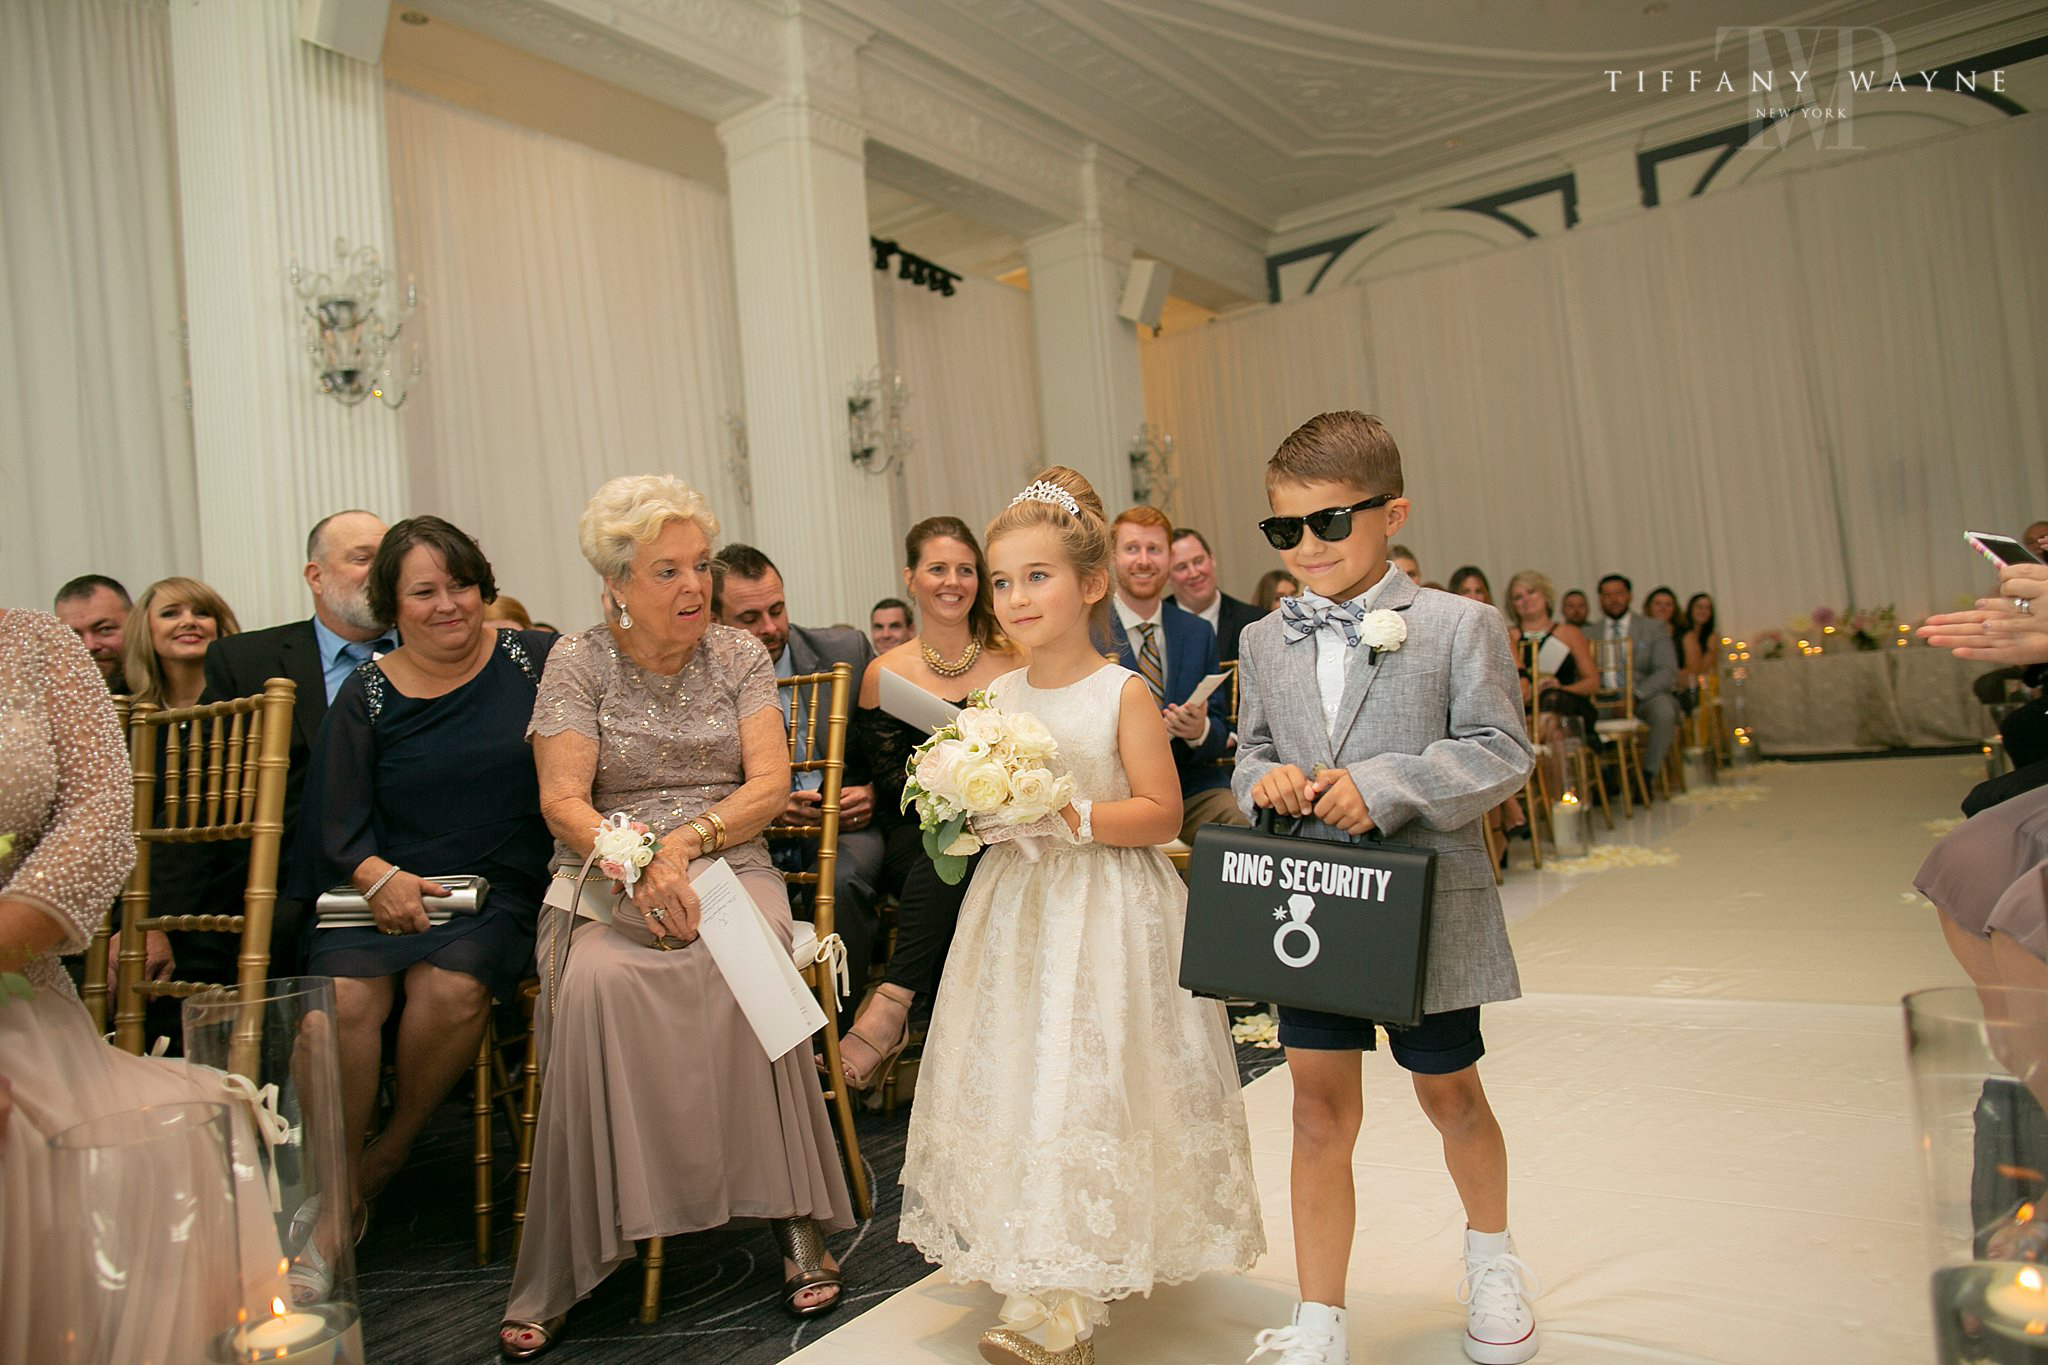 flower girl and ring bearer enter ceremony photographed by Tiffany Wayne Photography